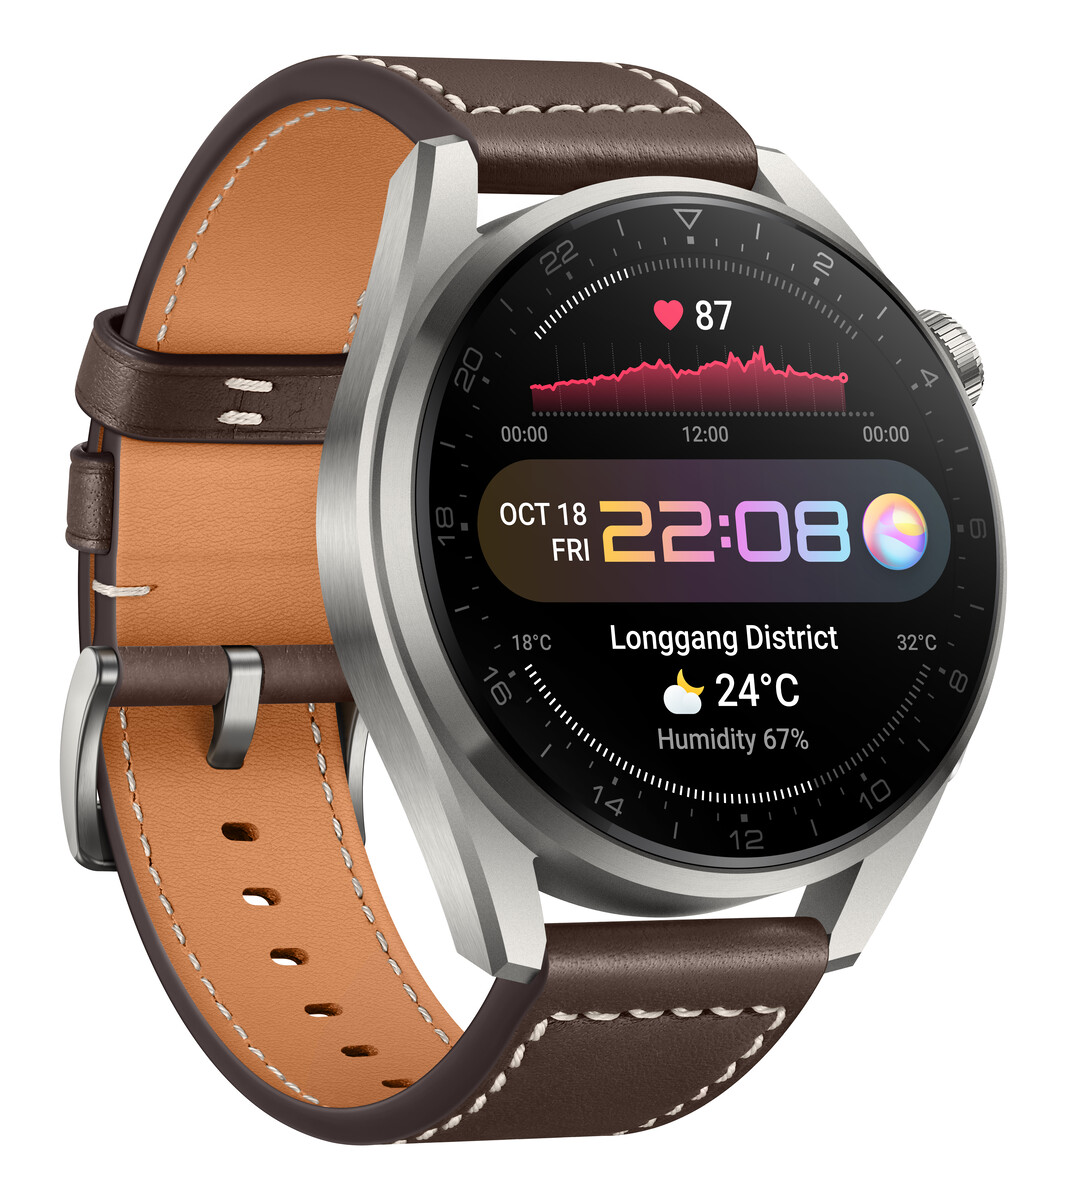 Huawei officially unveils the Watch 3 and 3 Pro: new 4G/LTE-enabled wearables with premium 